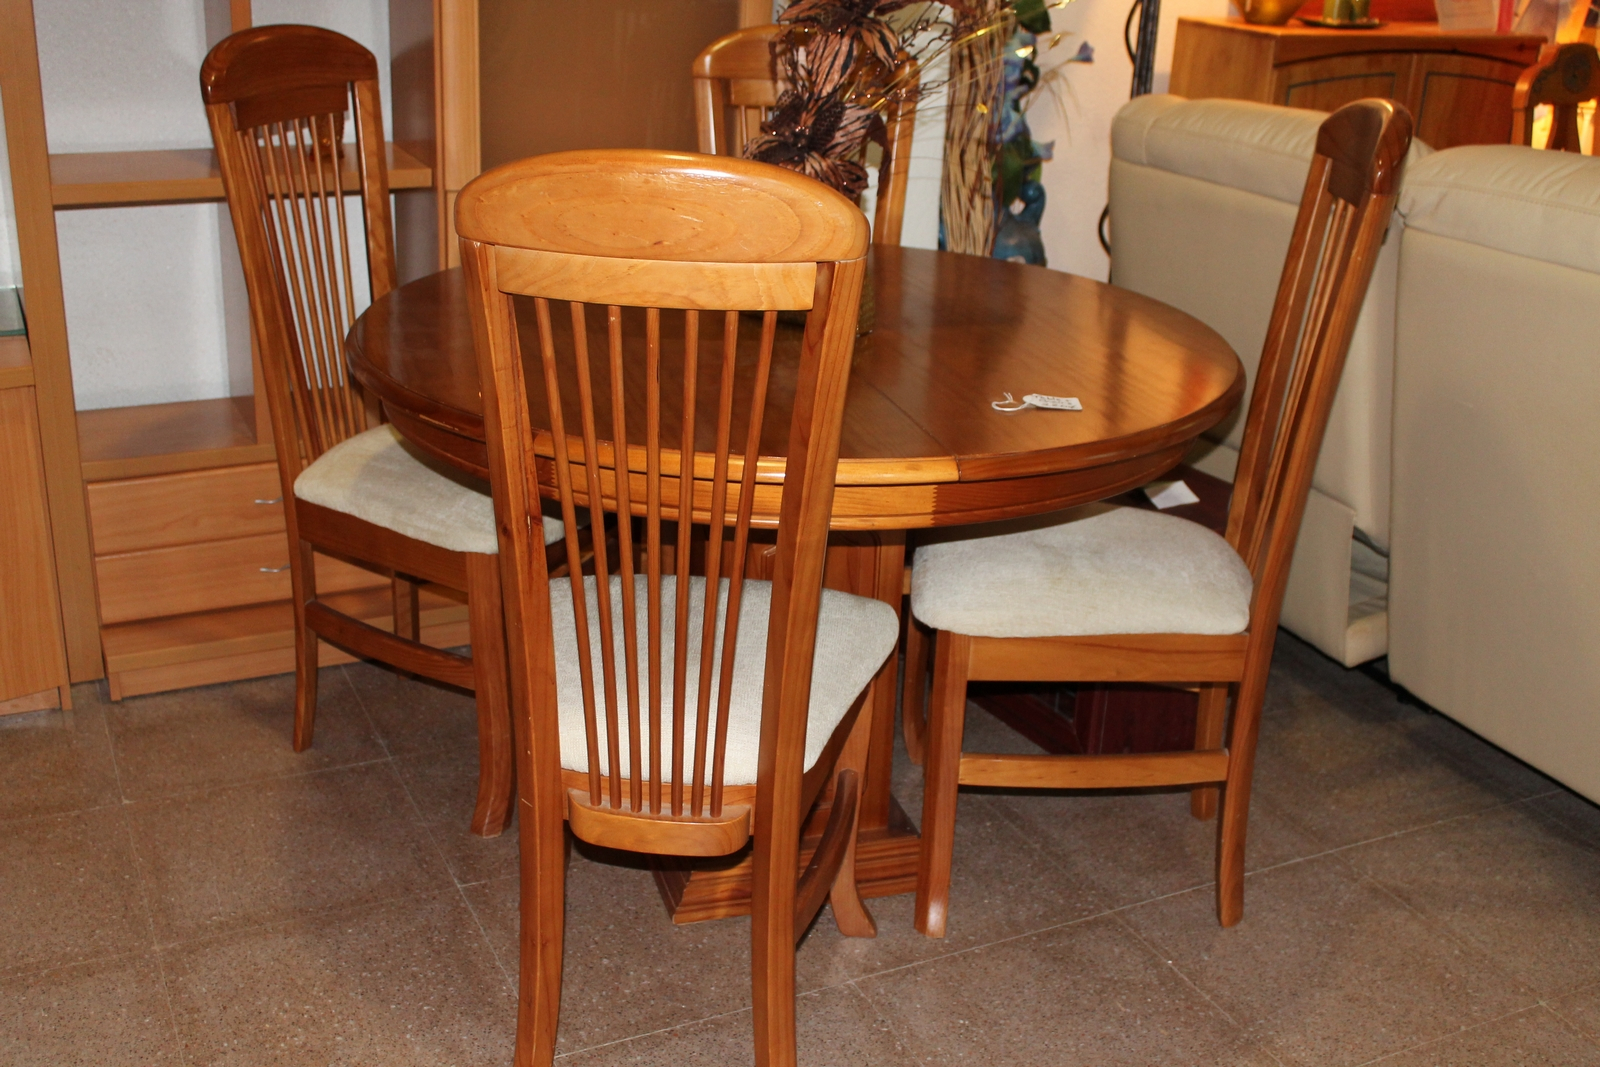 Second Hand Dining Room Chairs For Sale Johannesburg